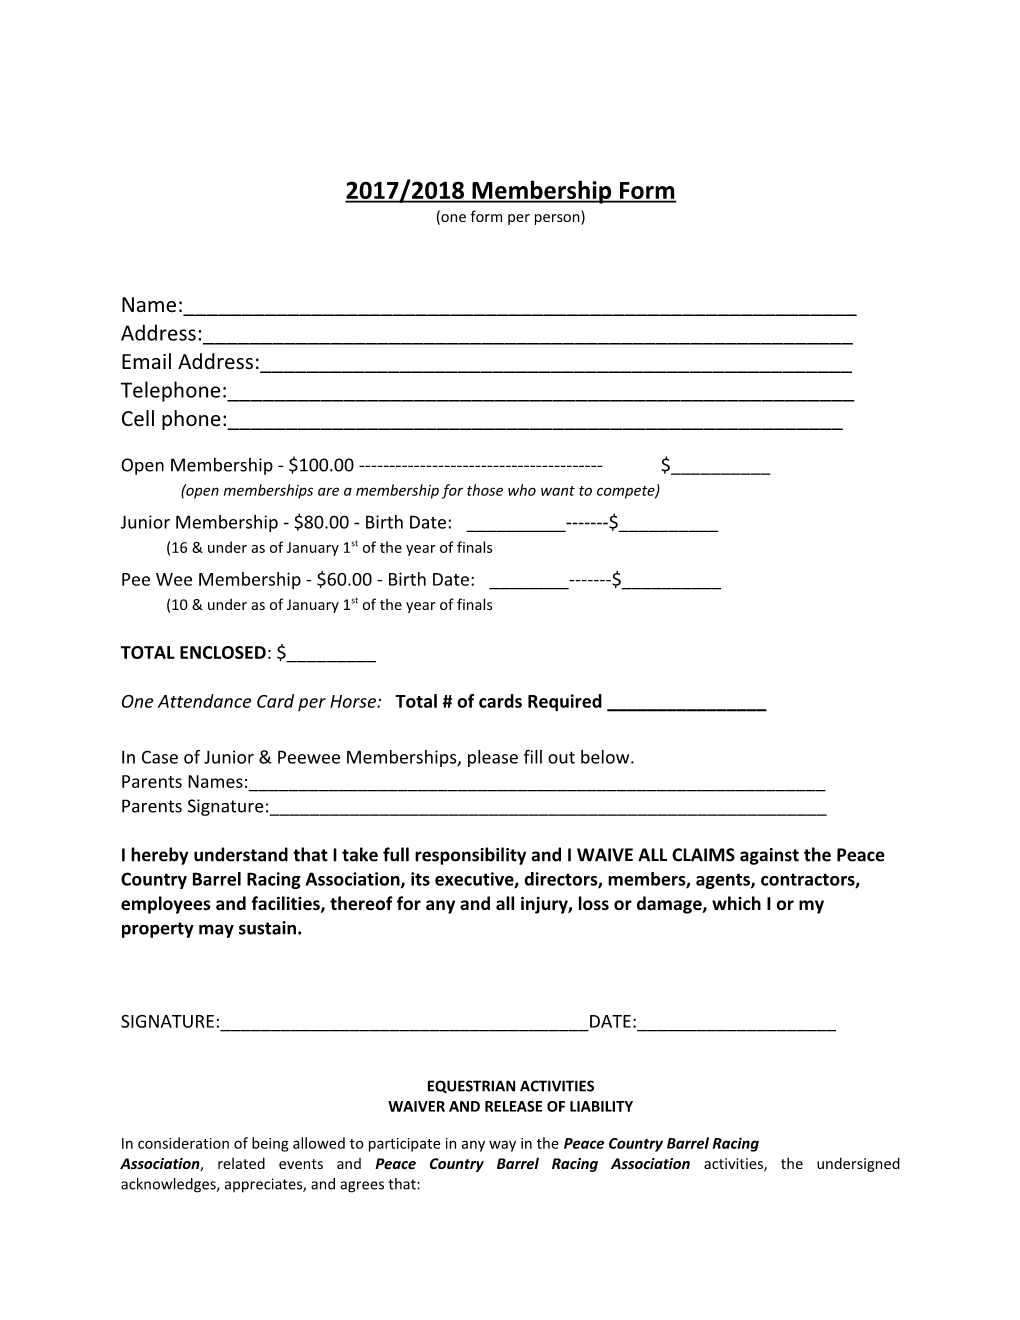 2017/2018 Membership Form (One Form Per Person)